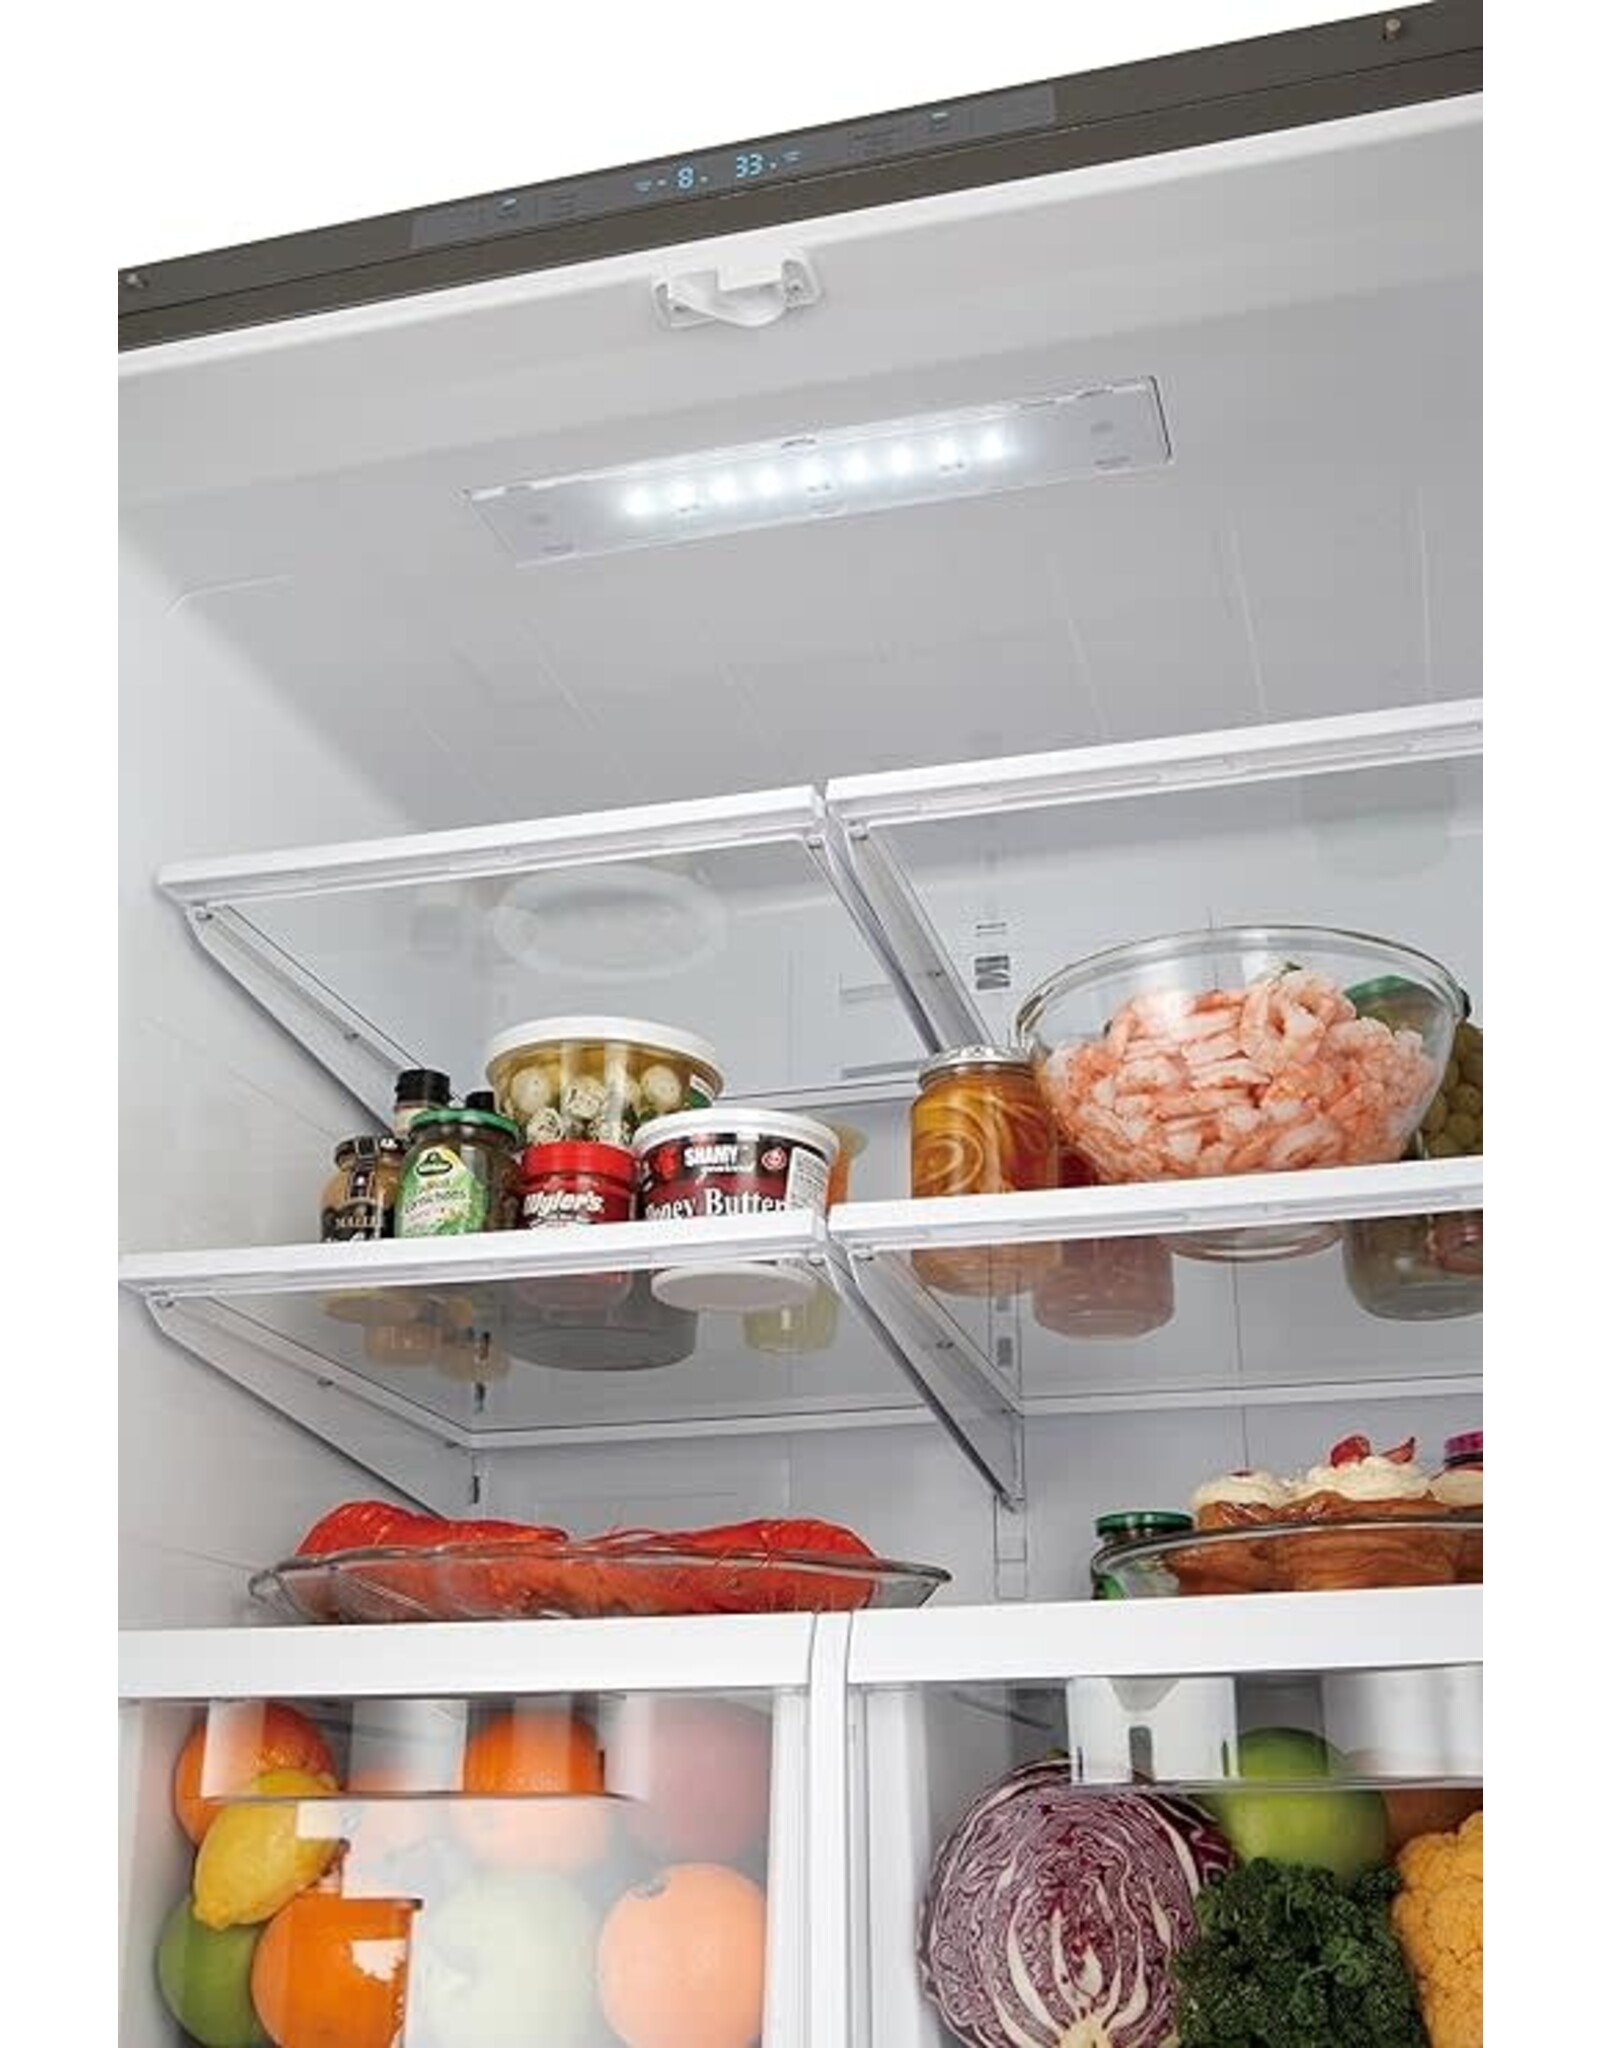 KENMORE 111.73022120 Kenmore 73022 26.1 cu. ft. French Door Refrigerator with Ice Maker - White